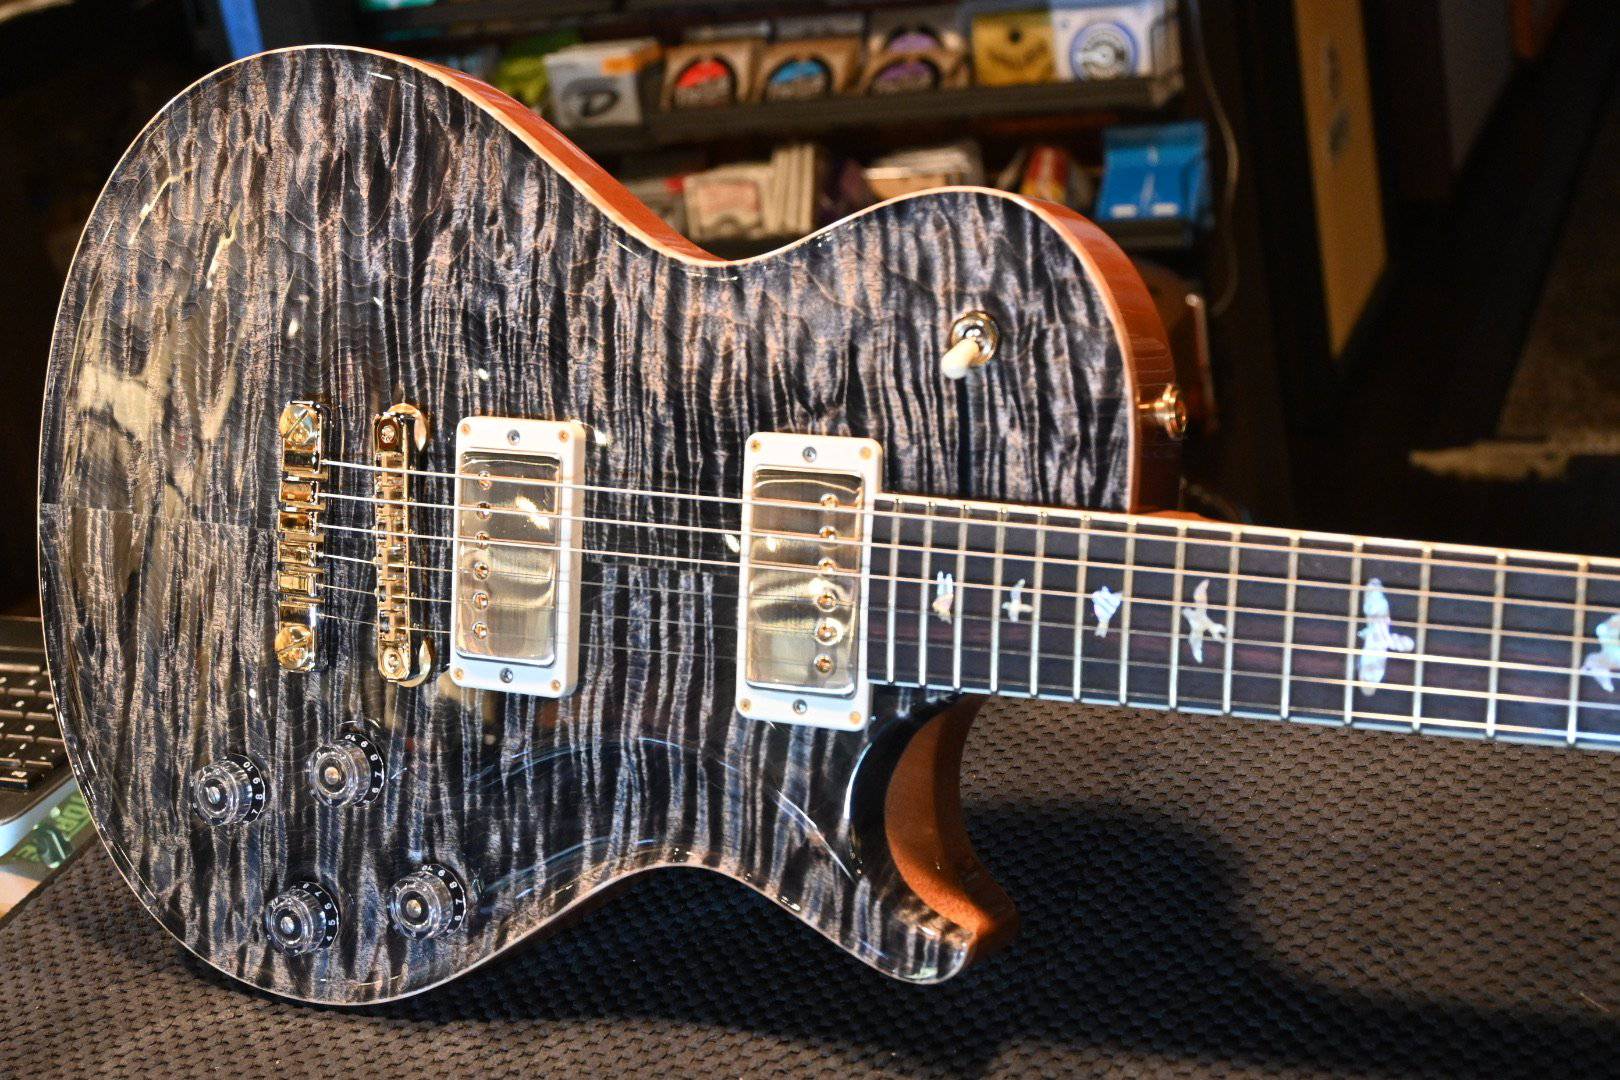 PRS Paul Reed Smith McCarty SC 594 Single-Cut “TCI-Tuned” 10-Top - Charcoal #5605 - Danville Music